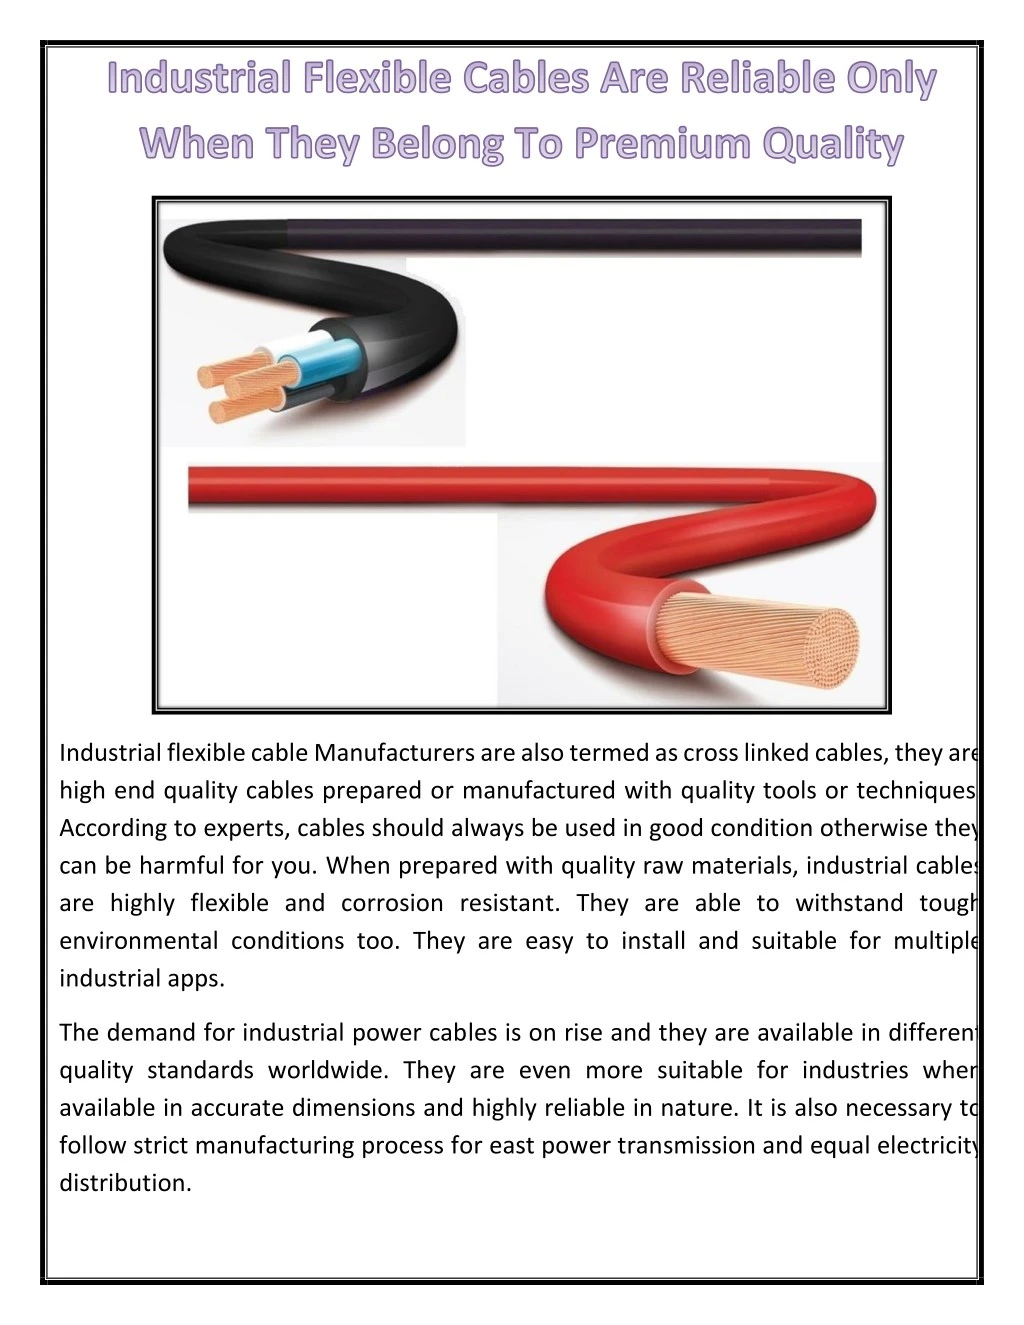 industrial flexible cable manufacturers are also